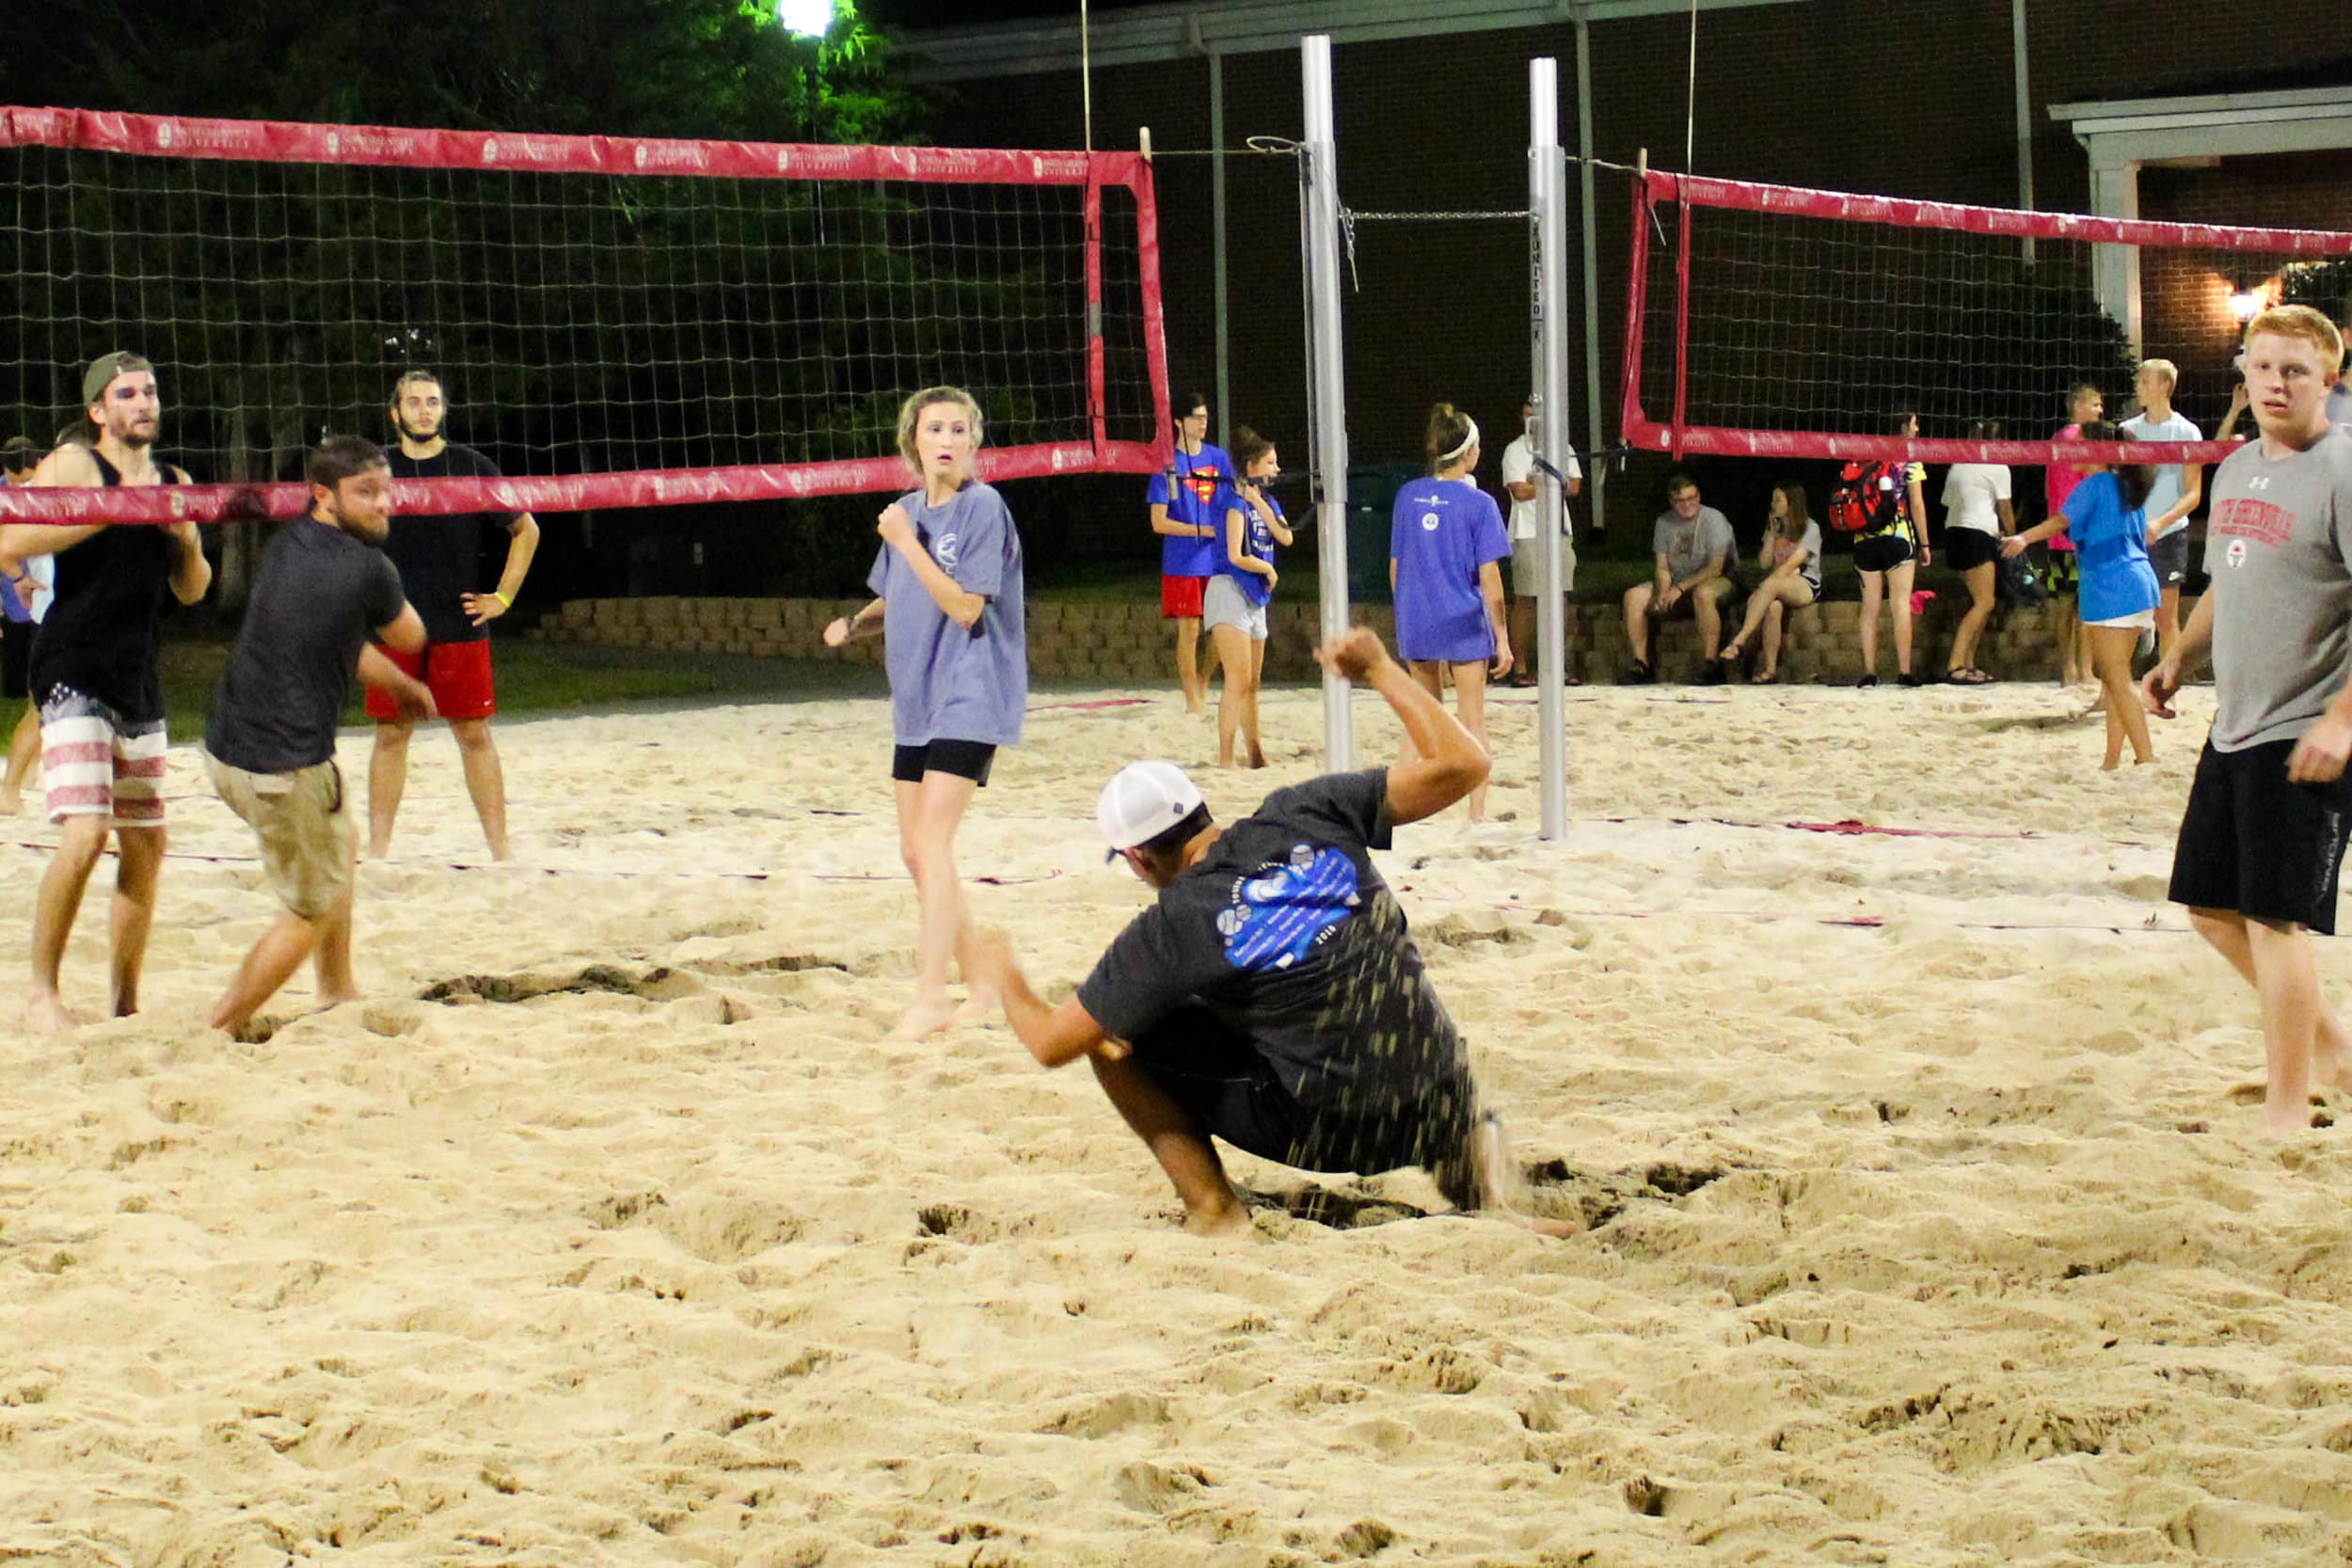 After the ball was spiked over the net, a player ducks to avoid being hit by the incoming ball.